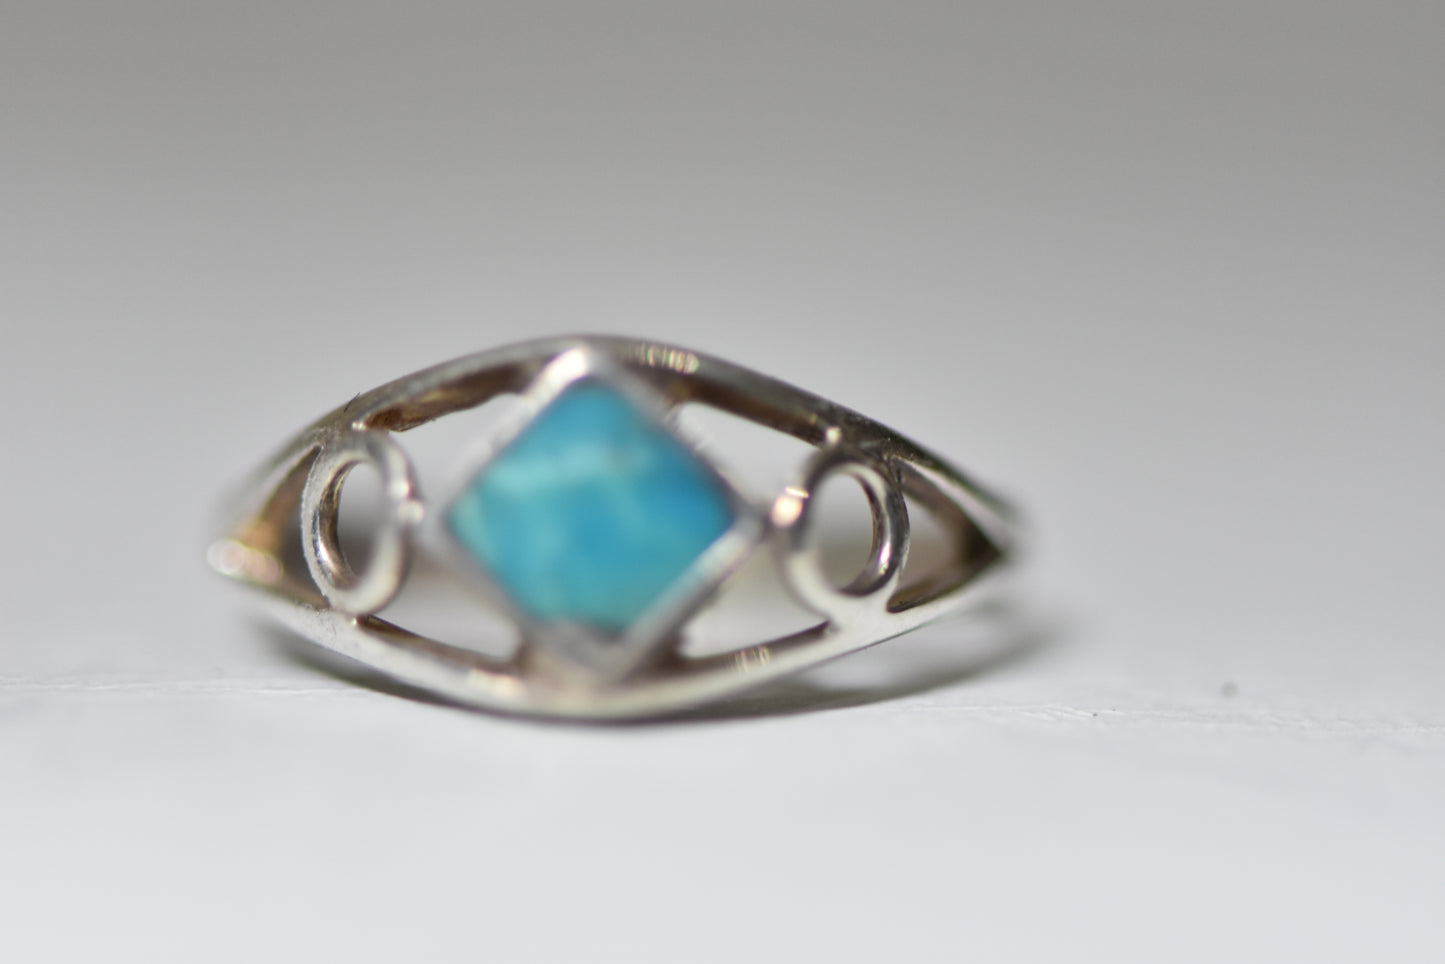 Turquoise ring southwest baby pinky sterling silver women girls